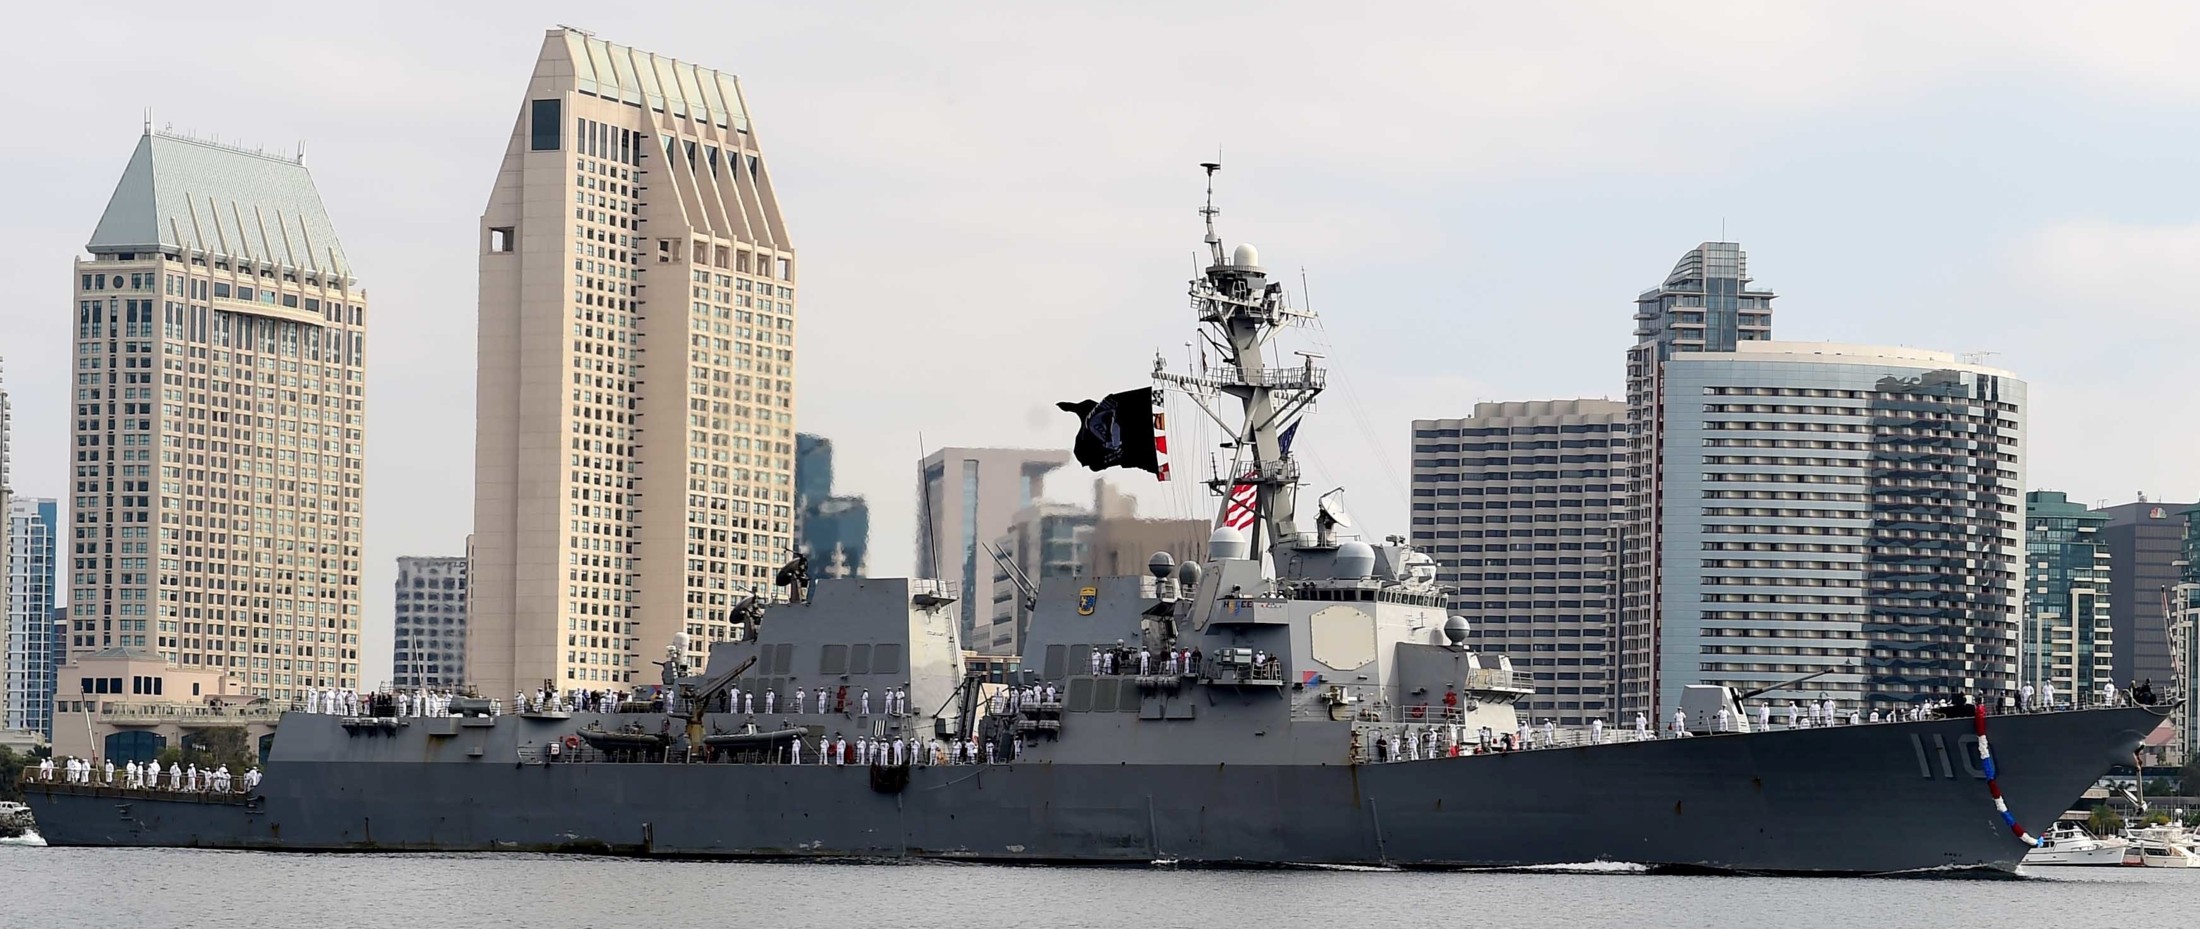 ddg-110 uss william p. lawrence arleigh burke class guided missile destroyer aegis us navy returning san diego california 34